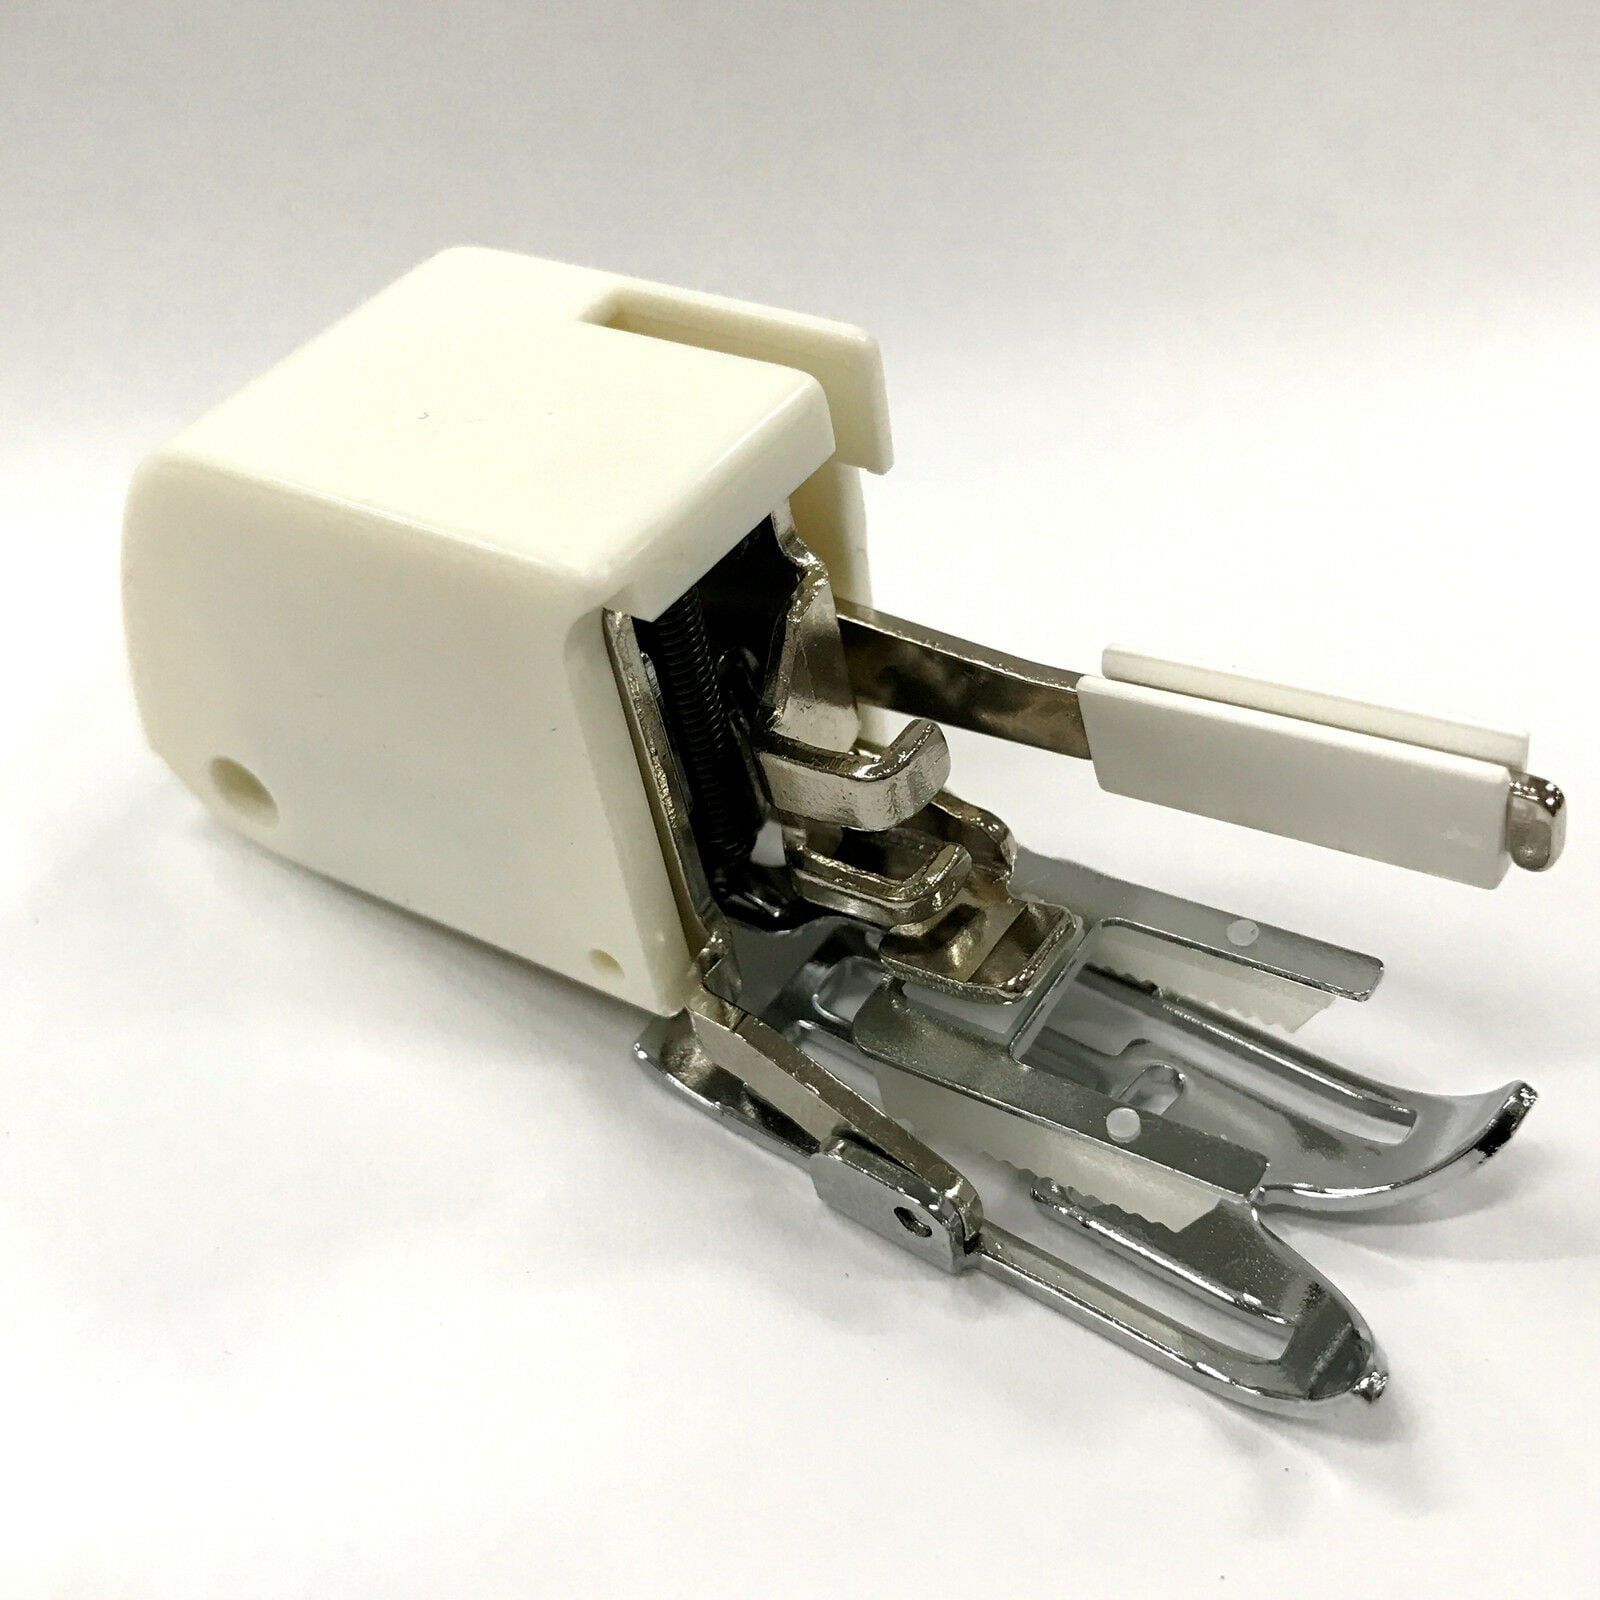 # 214872011  Janome Kenmore Sewing Machines,Even Feed/Walking Foot Presser Foot 